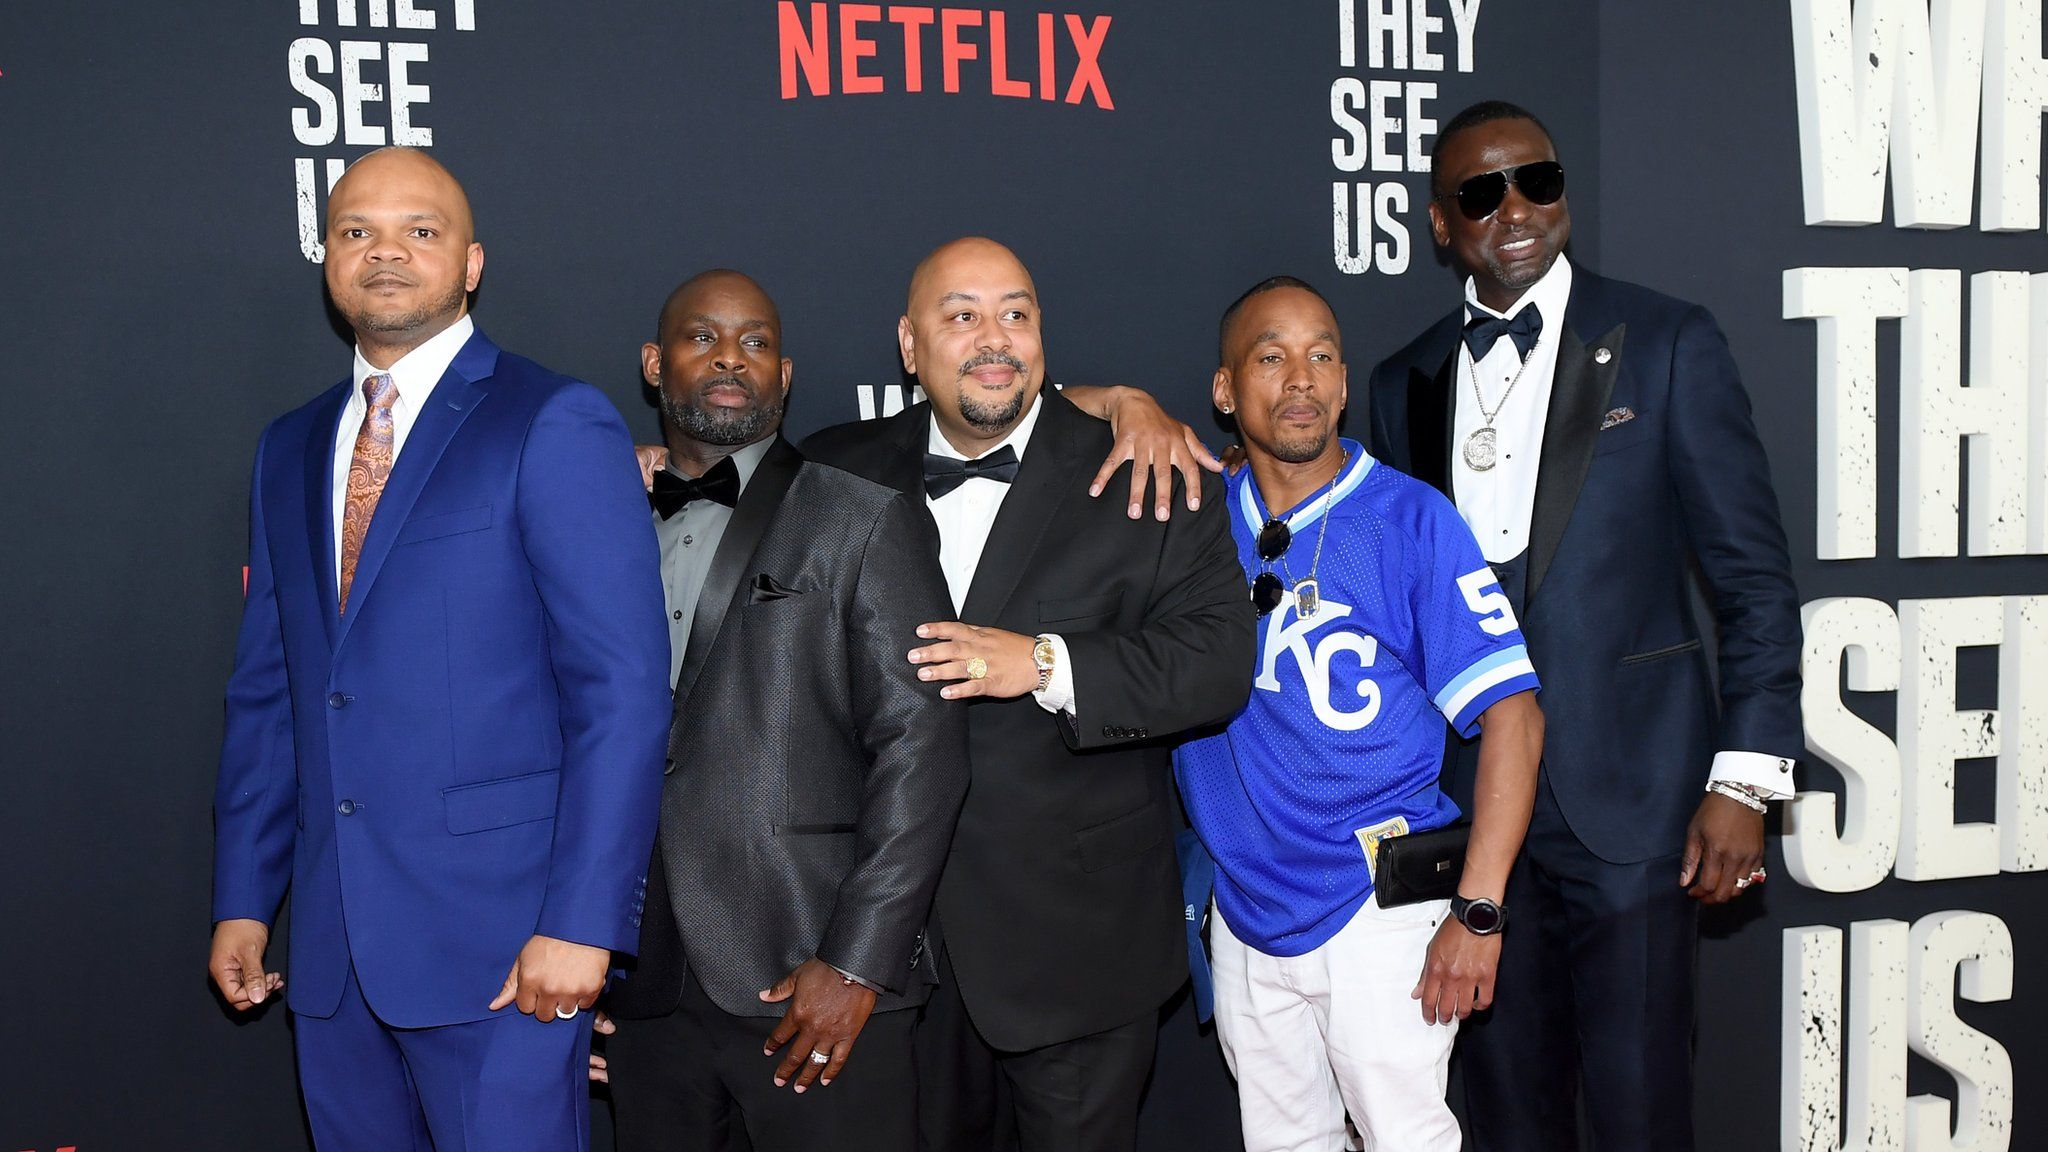 The main cast of When They See Us